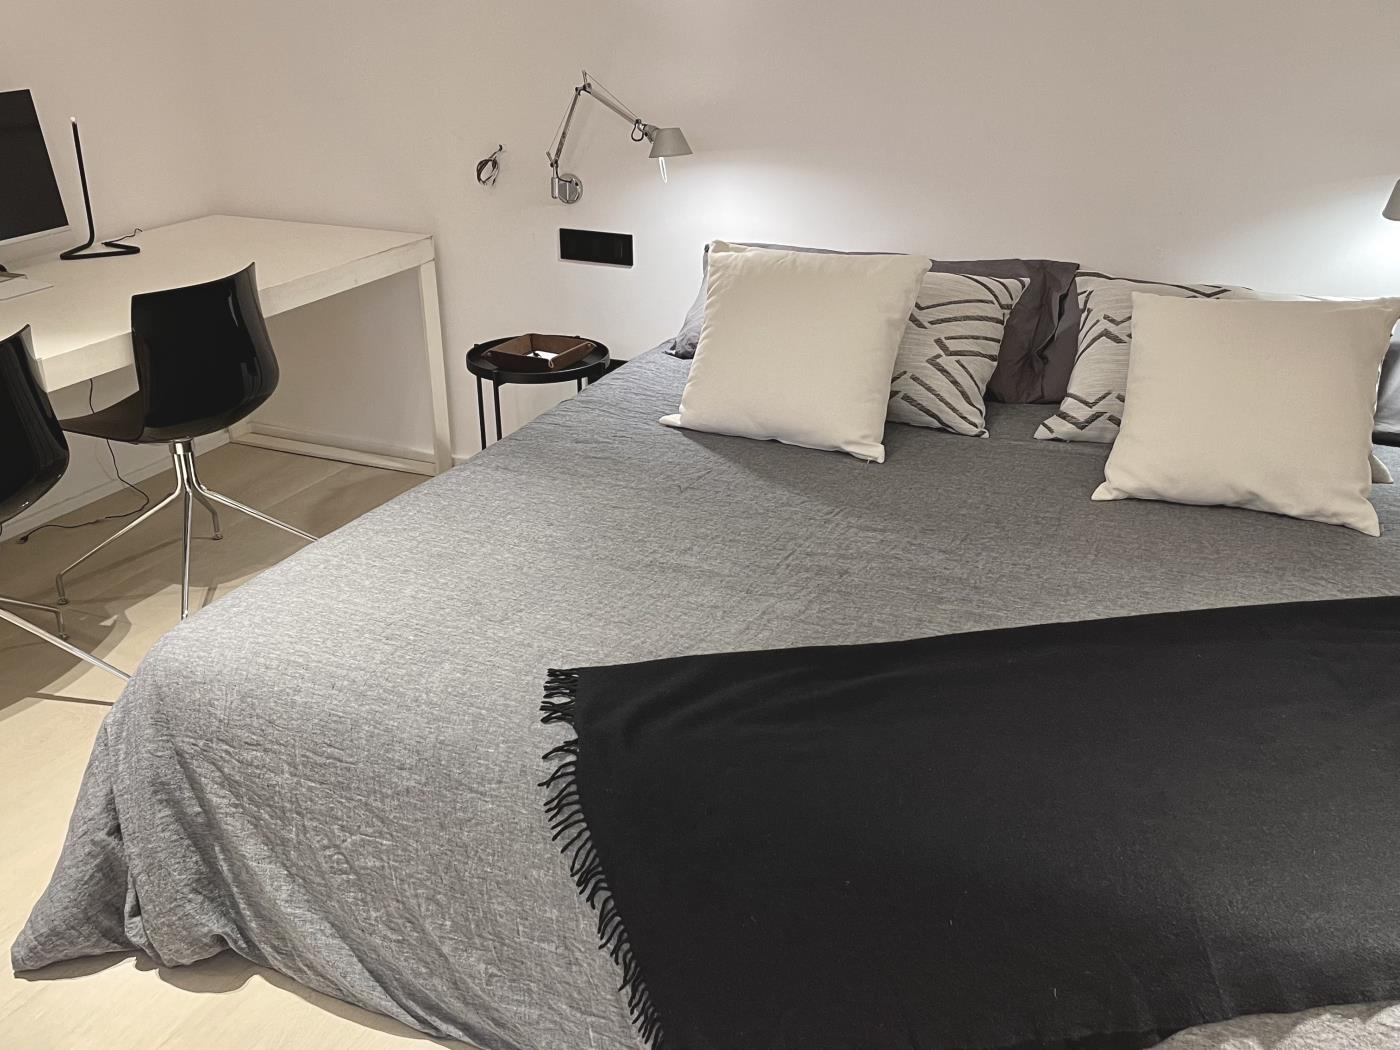 Newly Furnished monthly rental loft in Gràcia district Barcelona - My Space Barcelona Apartments